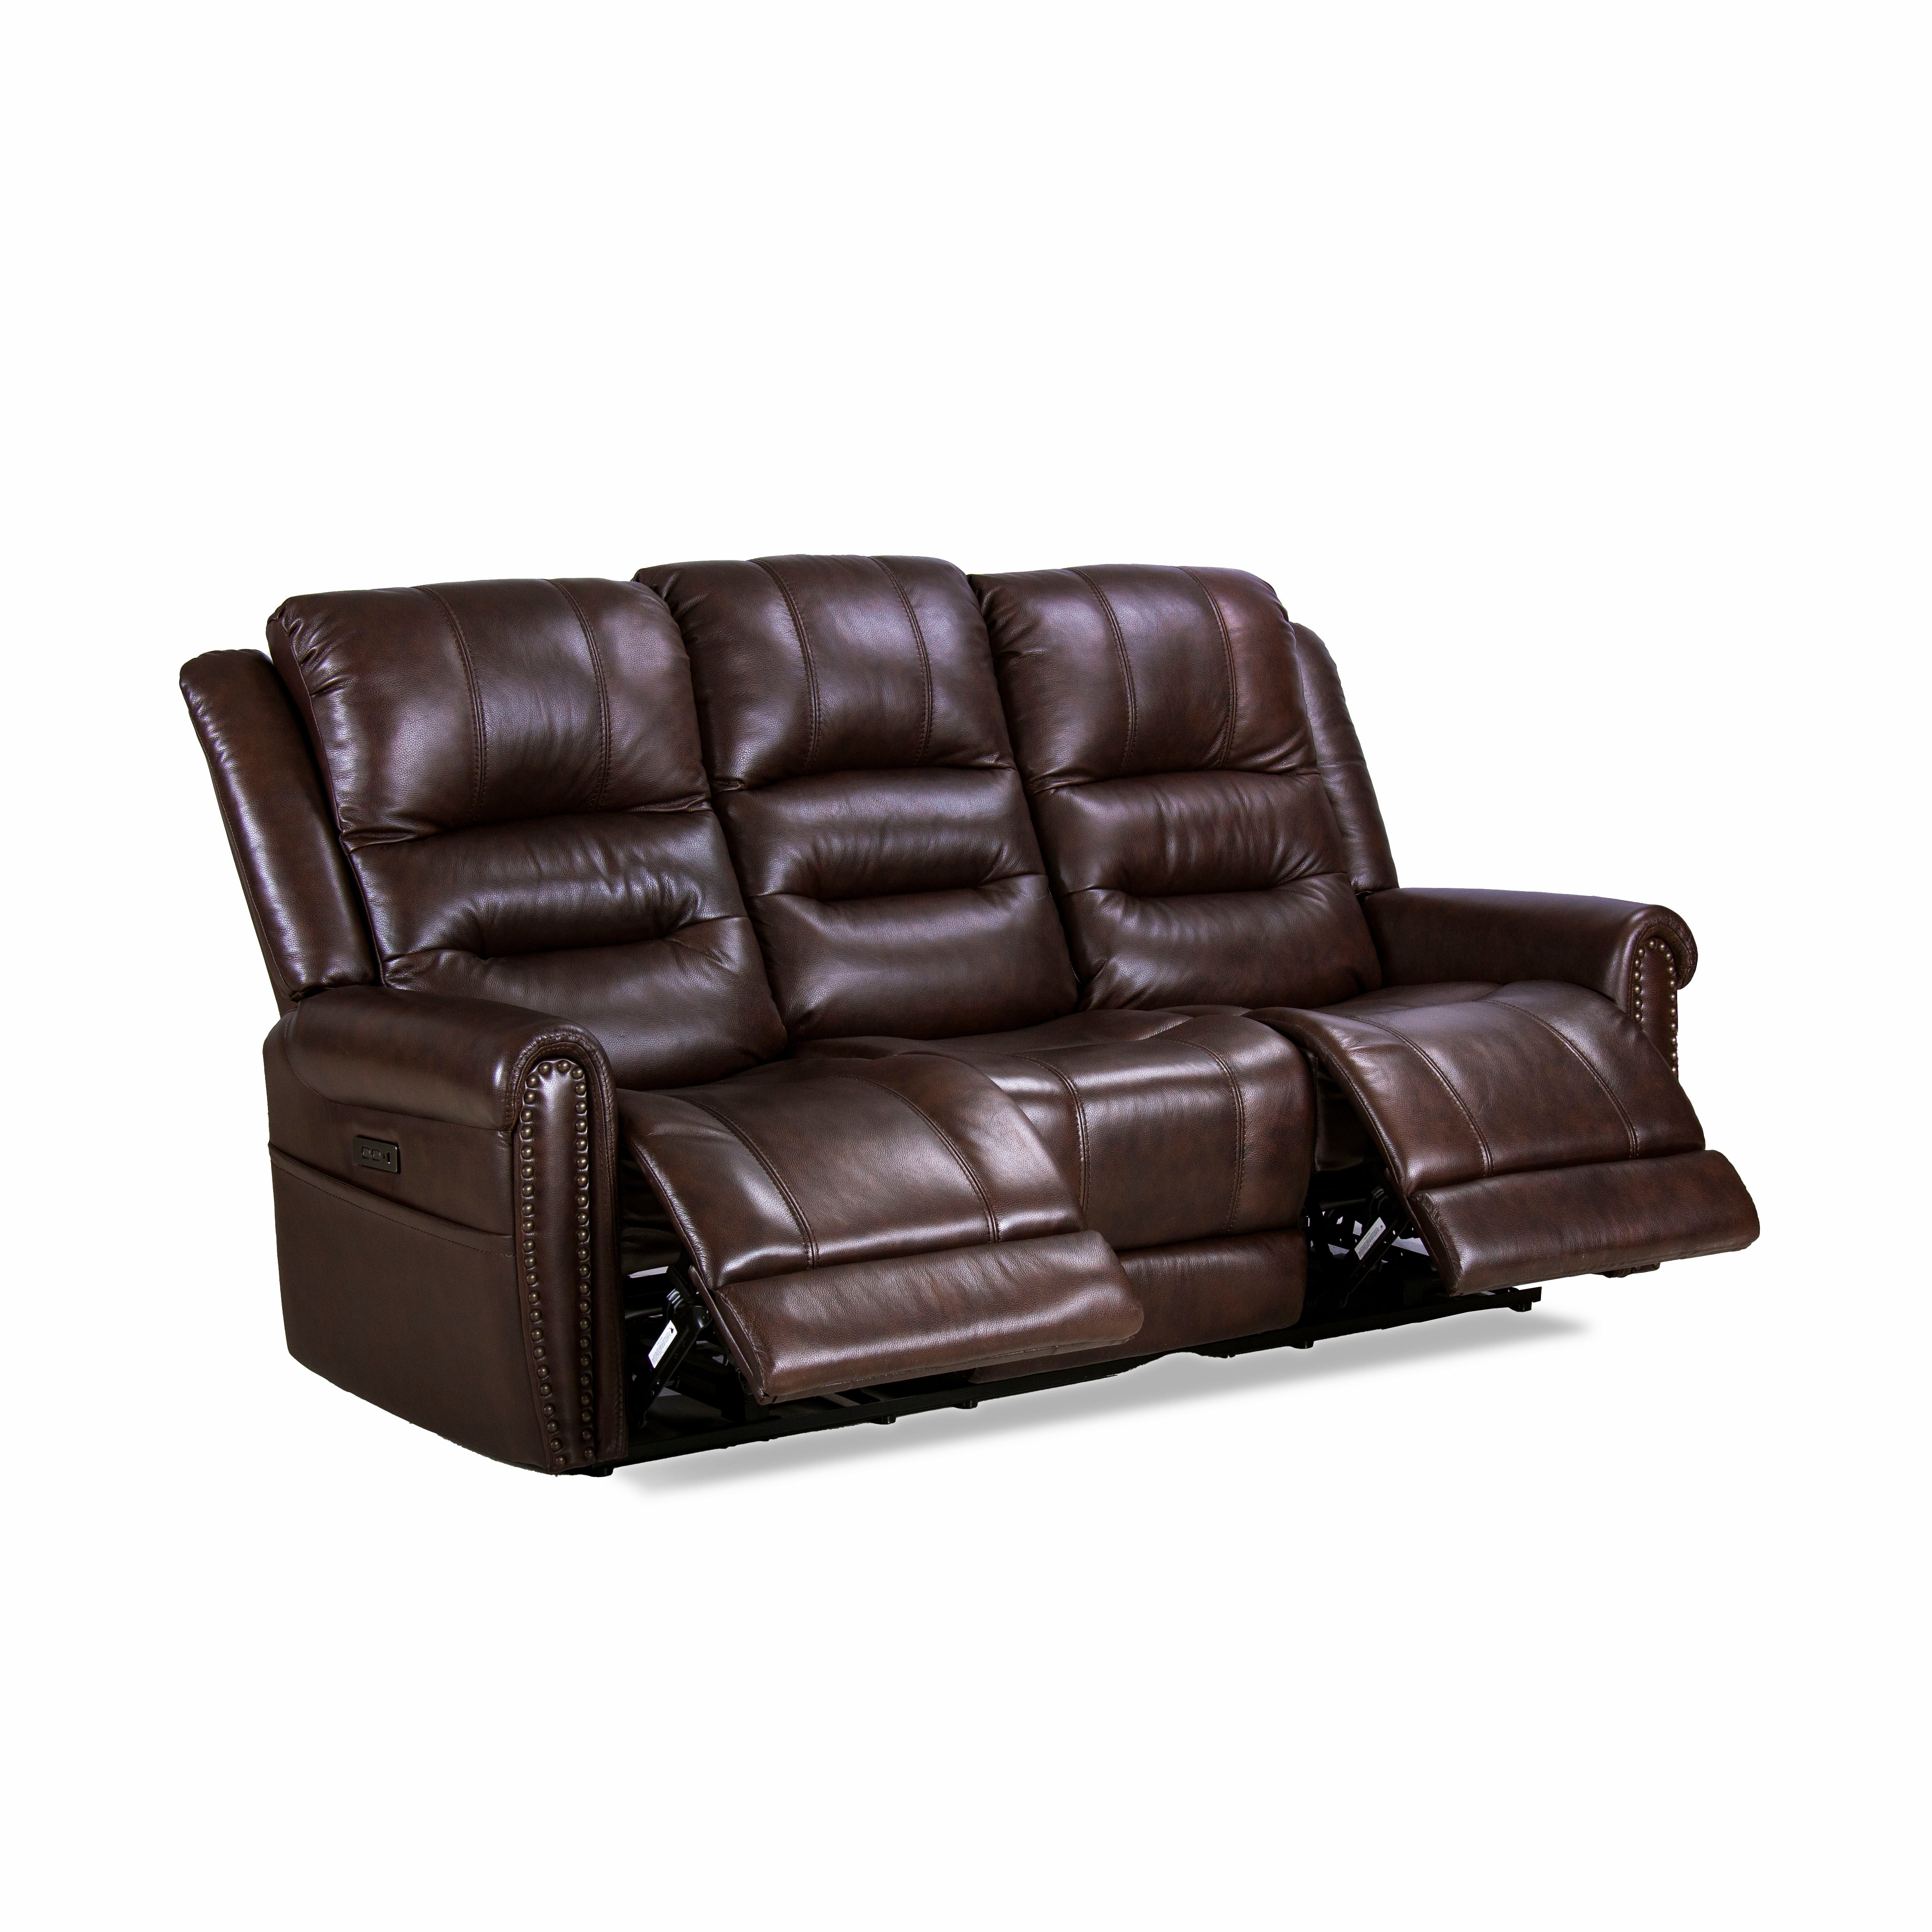 Espoo Genuine Top Grain Leather Nailhead Dropdown Table And Adjustable Headrest Power Reclining Sofa In Brown